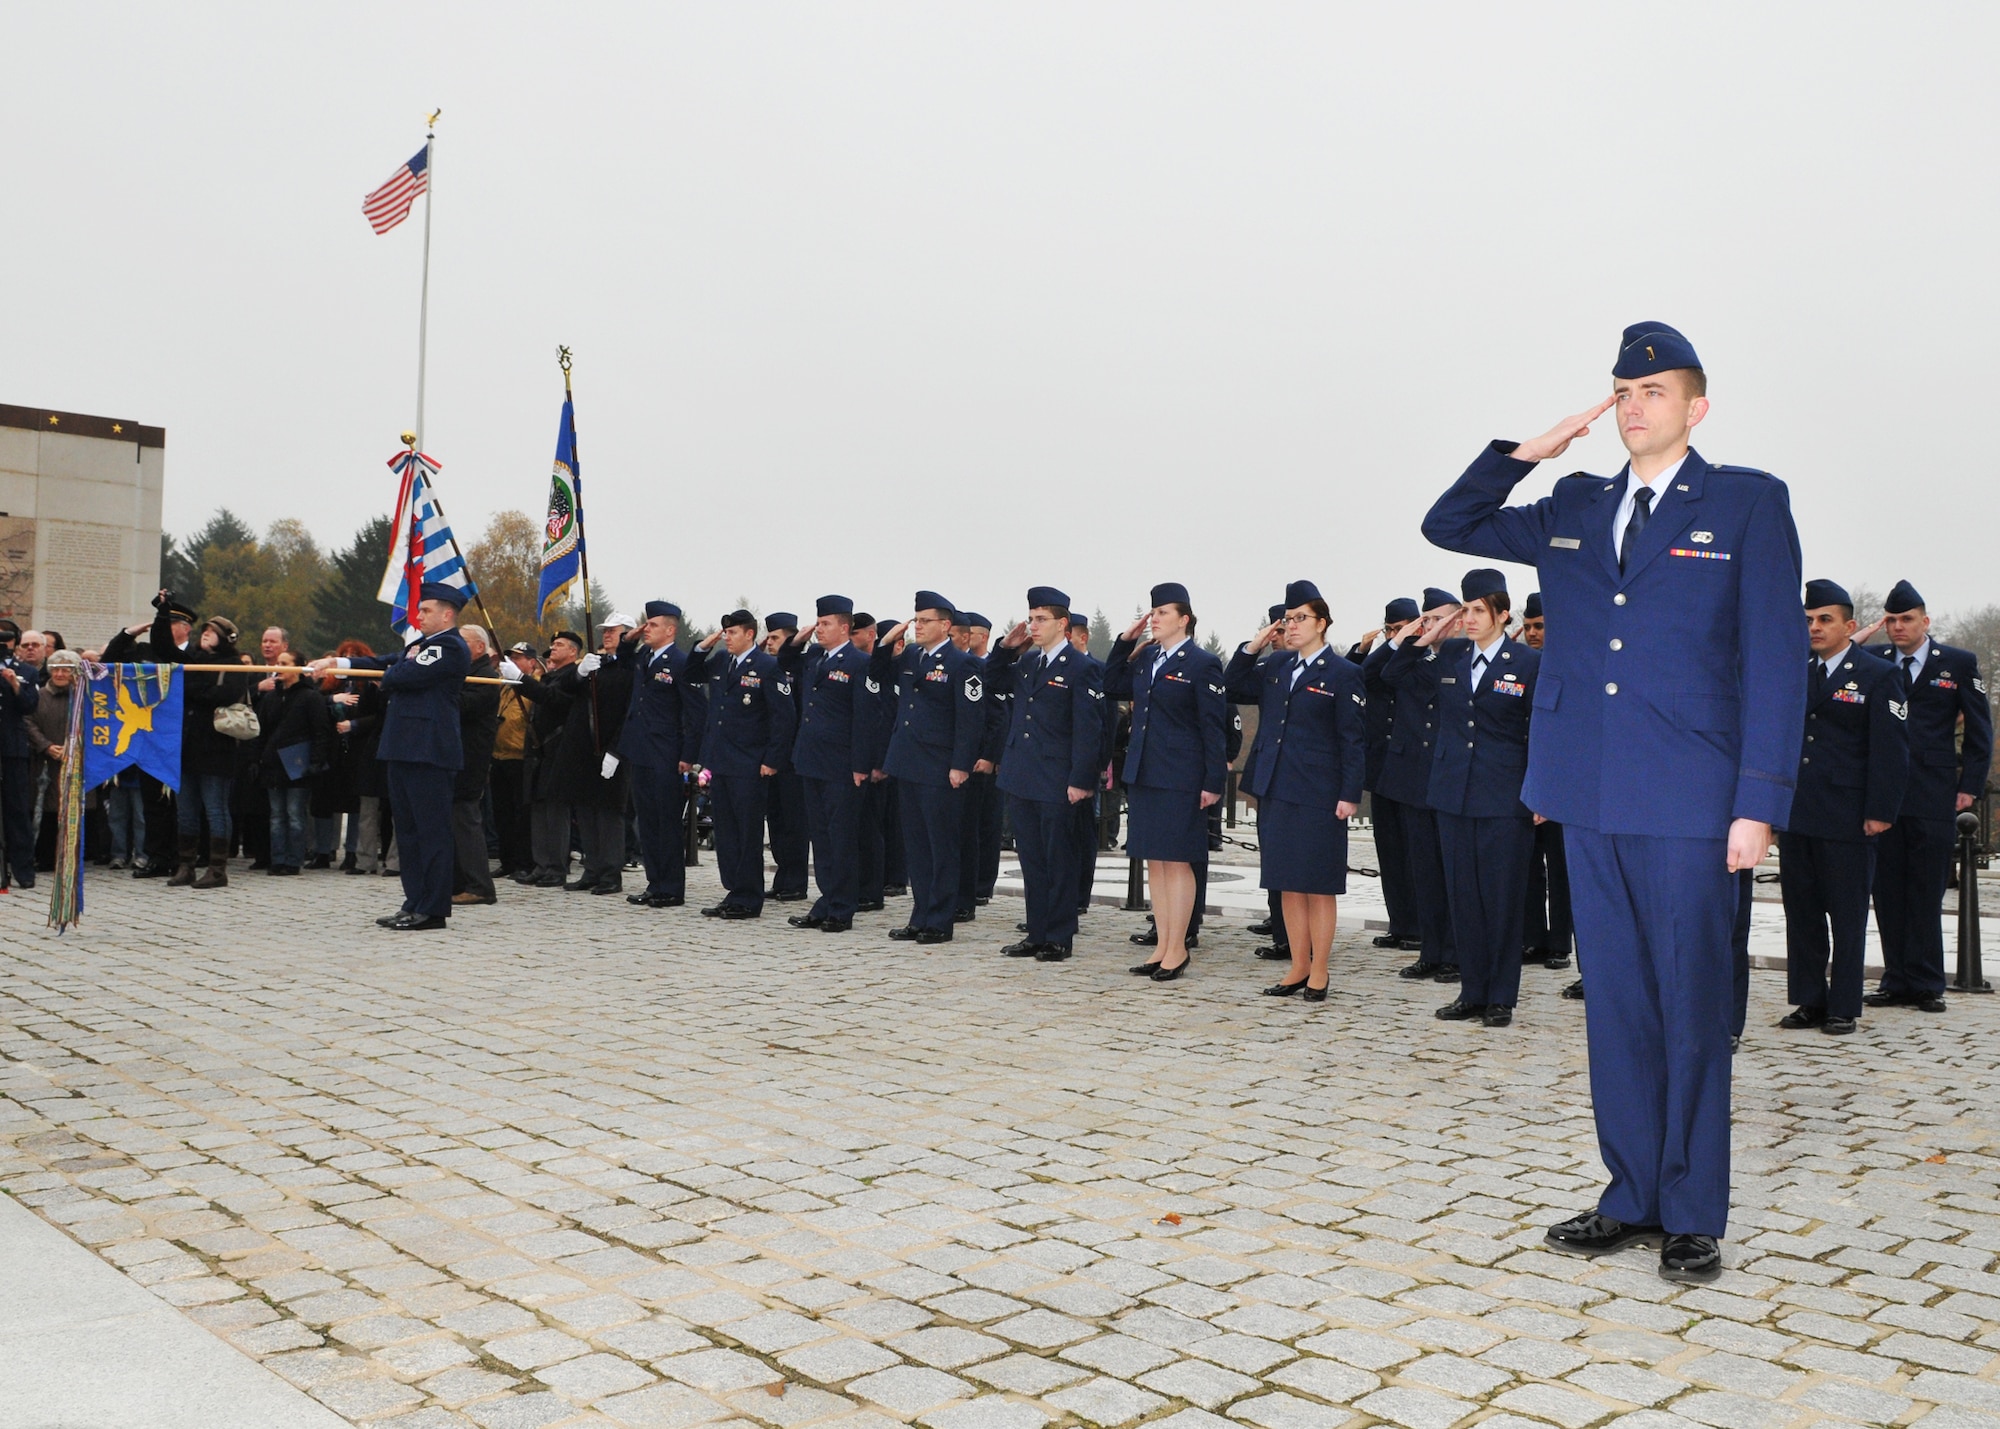 SPANGDAHLEM AIR BASE, Germany -- Members of the 52nd Fighter Wing salute during the national anthem at the annual Veterans Day ceremony at the Luxembourg American Cemetery and Memorial in Luxembourg City Nov. 11. More than 5,000 American servicemembers from World War II now rest at the 50.5 acre cemetery, which is one of 14 American cemeteries established overseas after World War II. (U.S. Air Force photo/Airman 1st Class Nick Wilson)